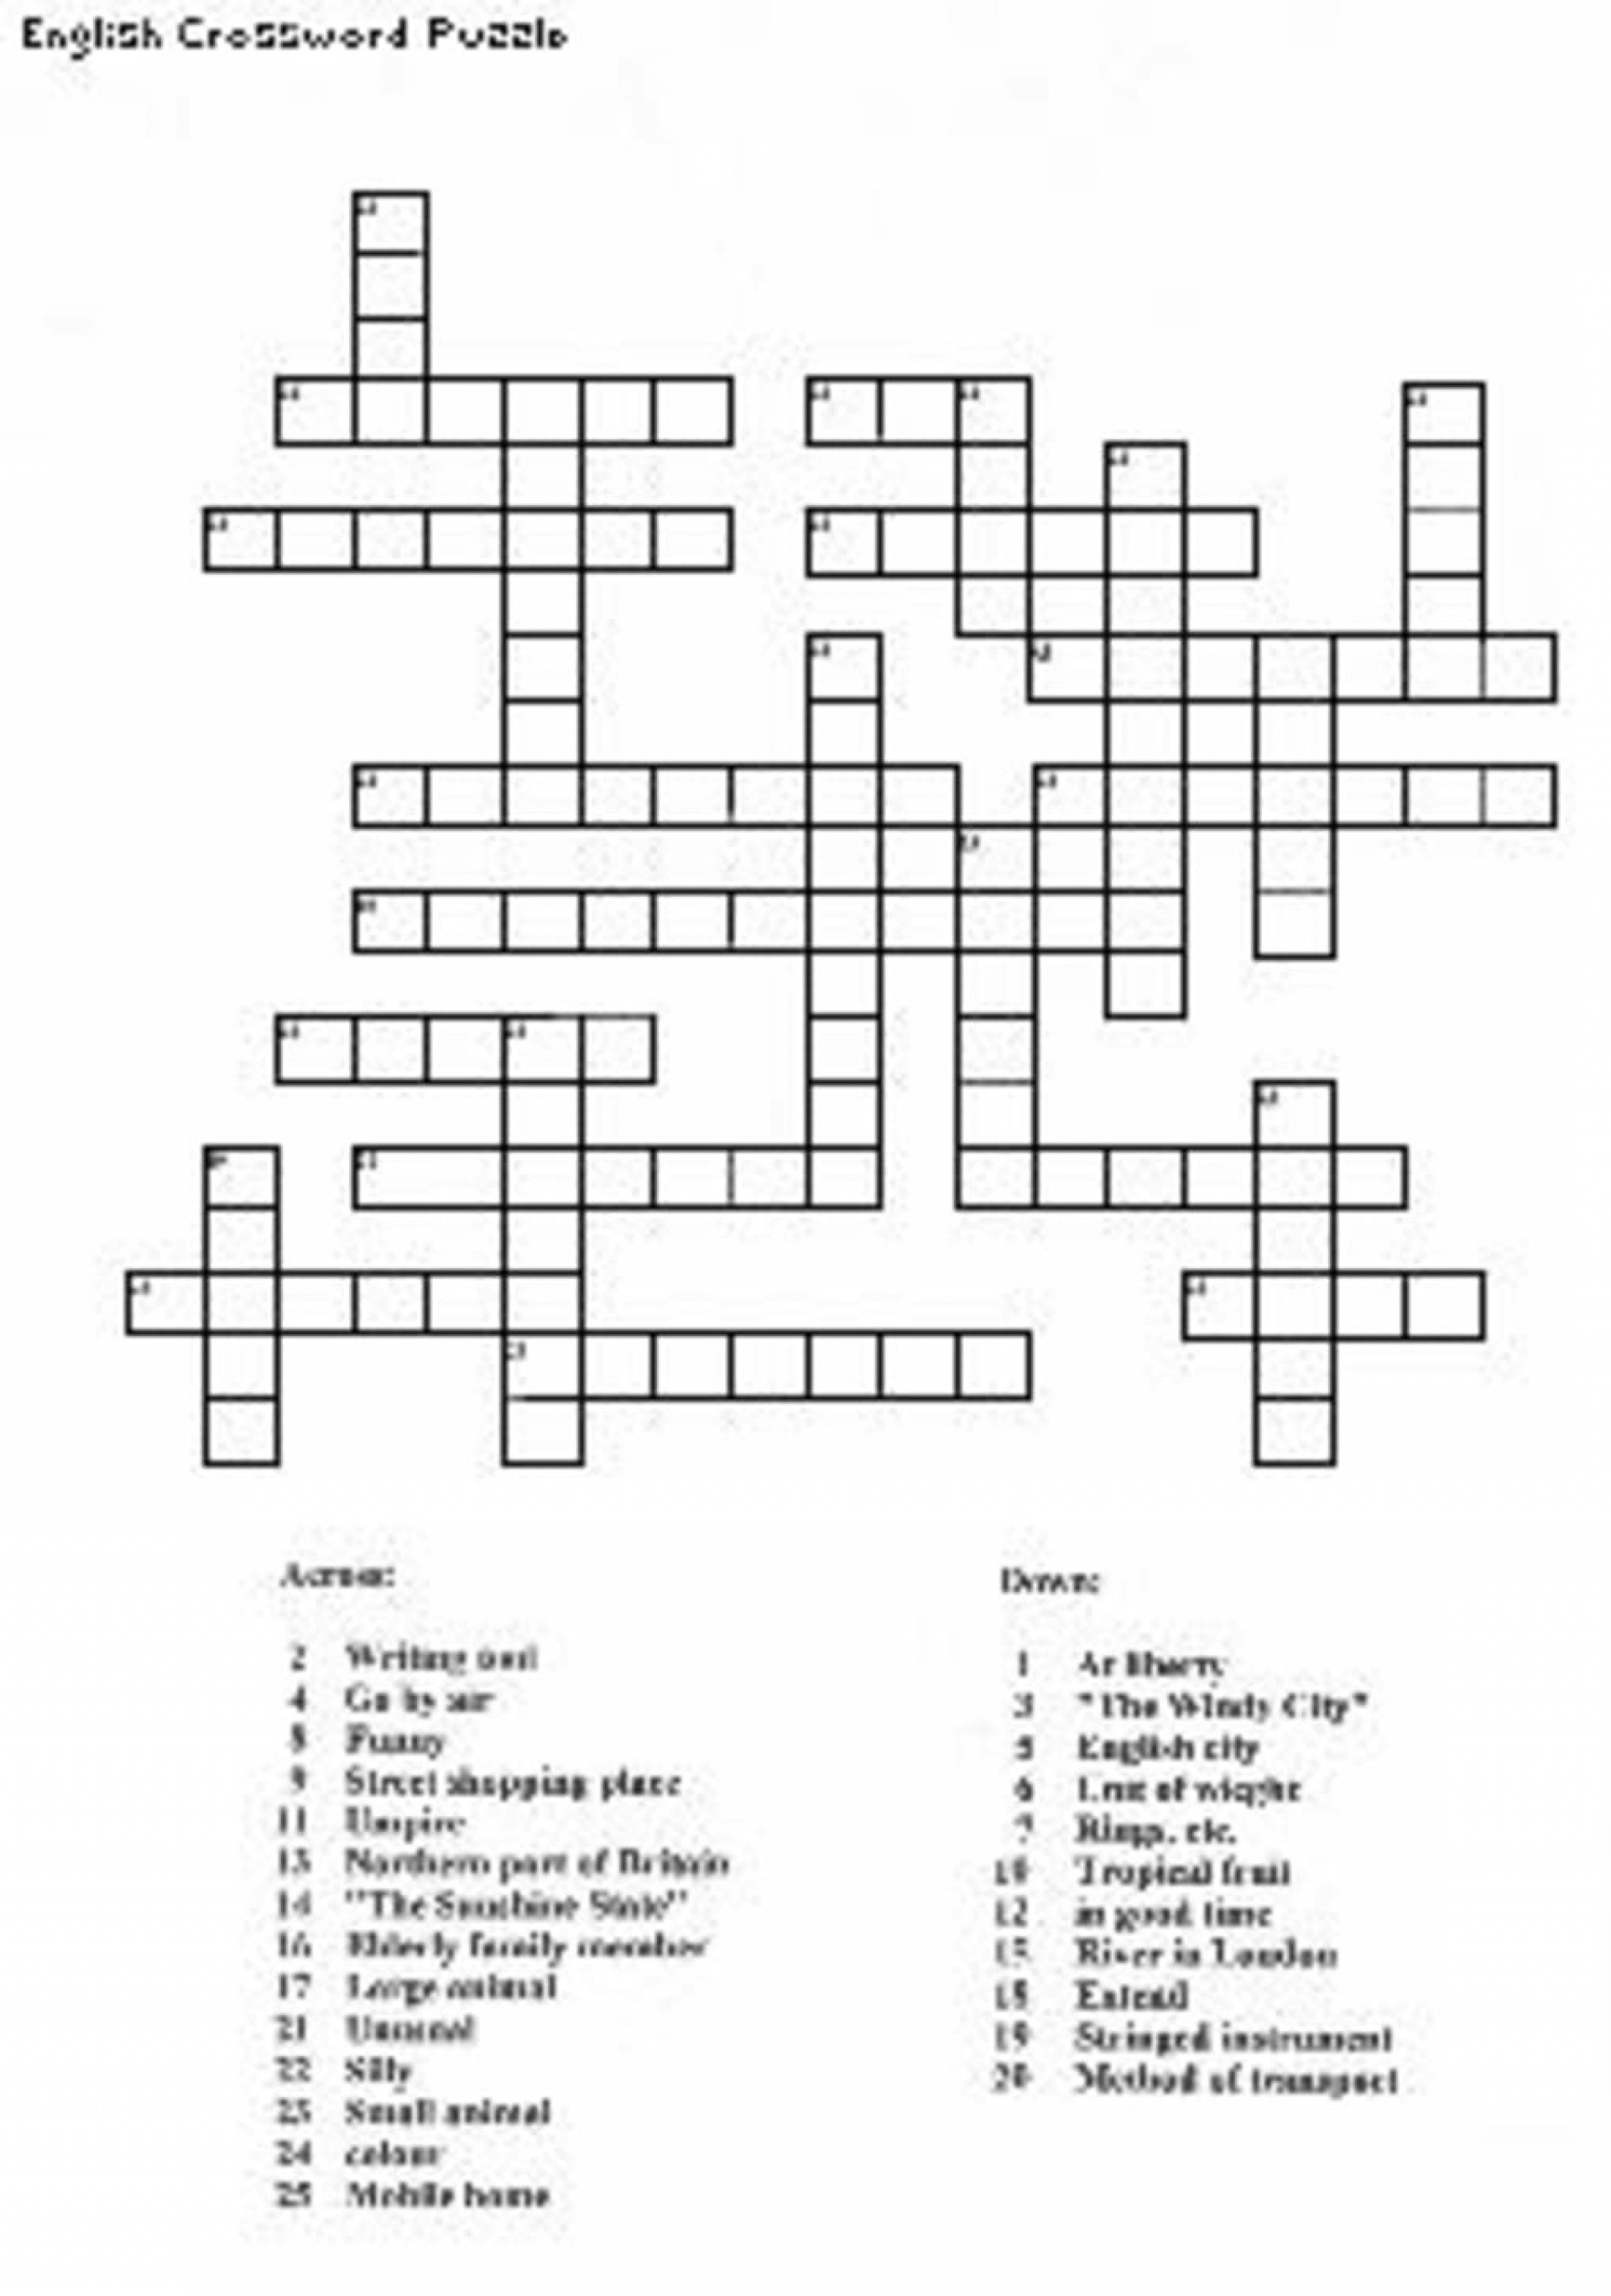 Crossword Puzzle Maker Free Printable Toolbox Screenshot - Create A - Make Your Own Crossword Puzzle Printable